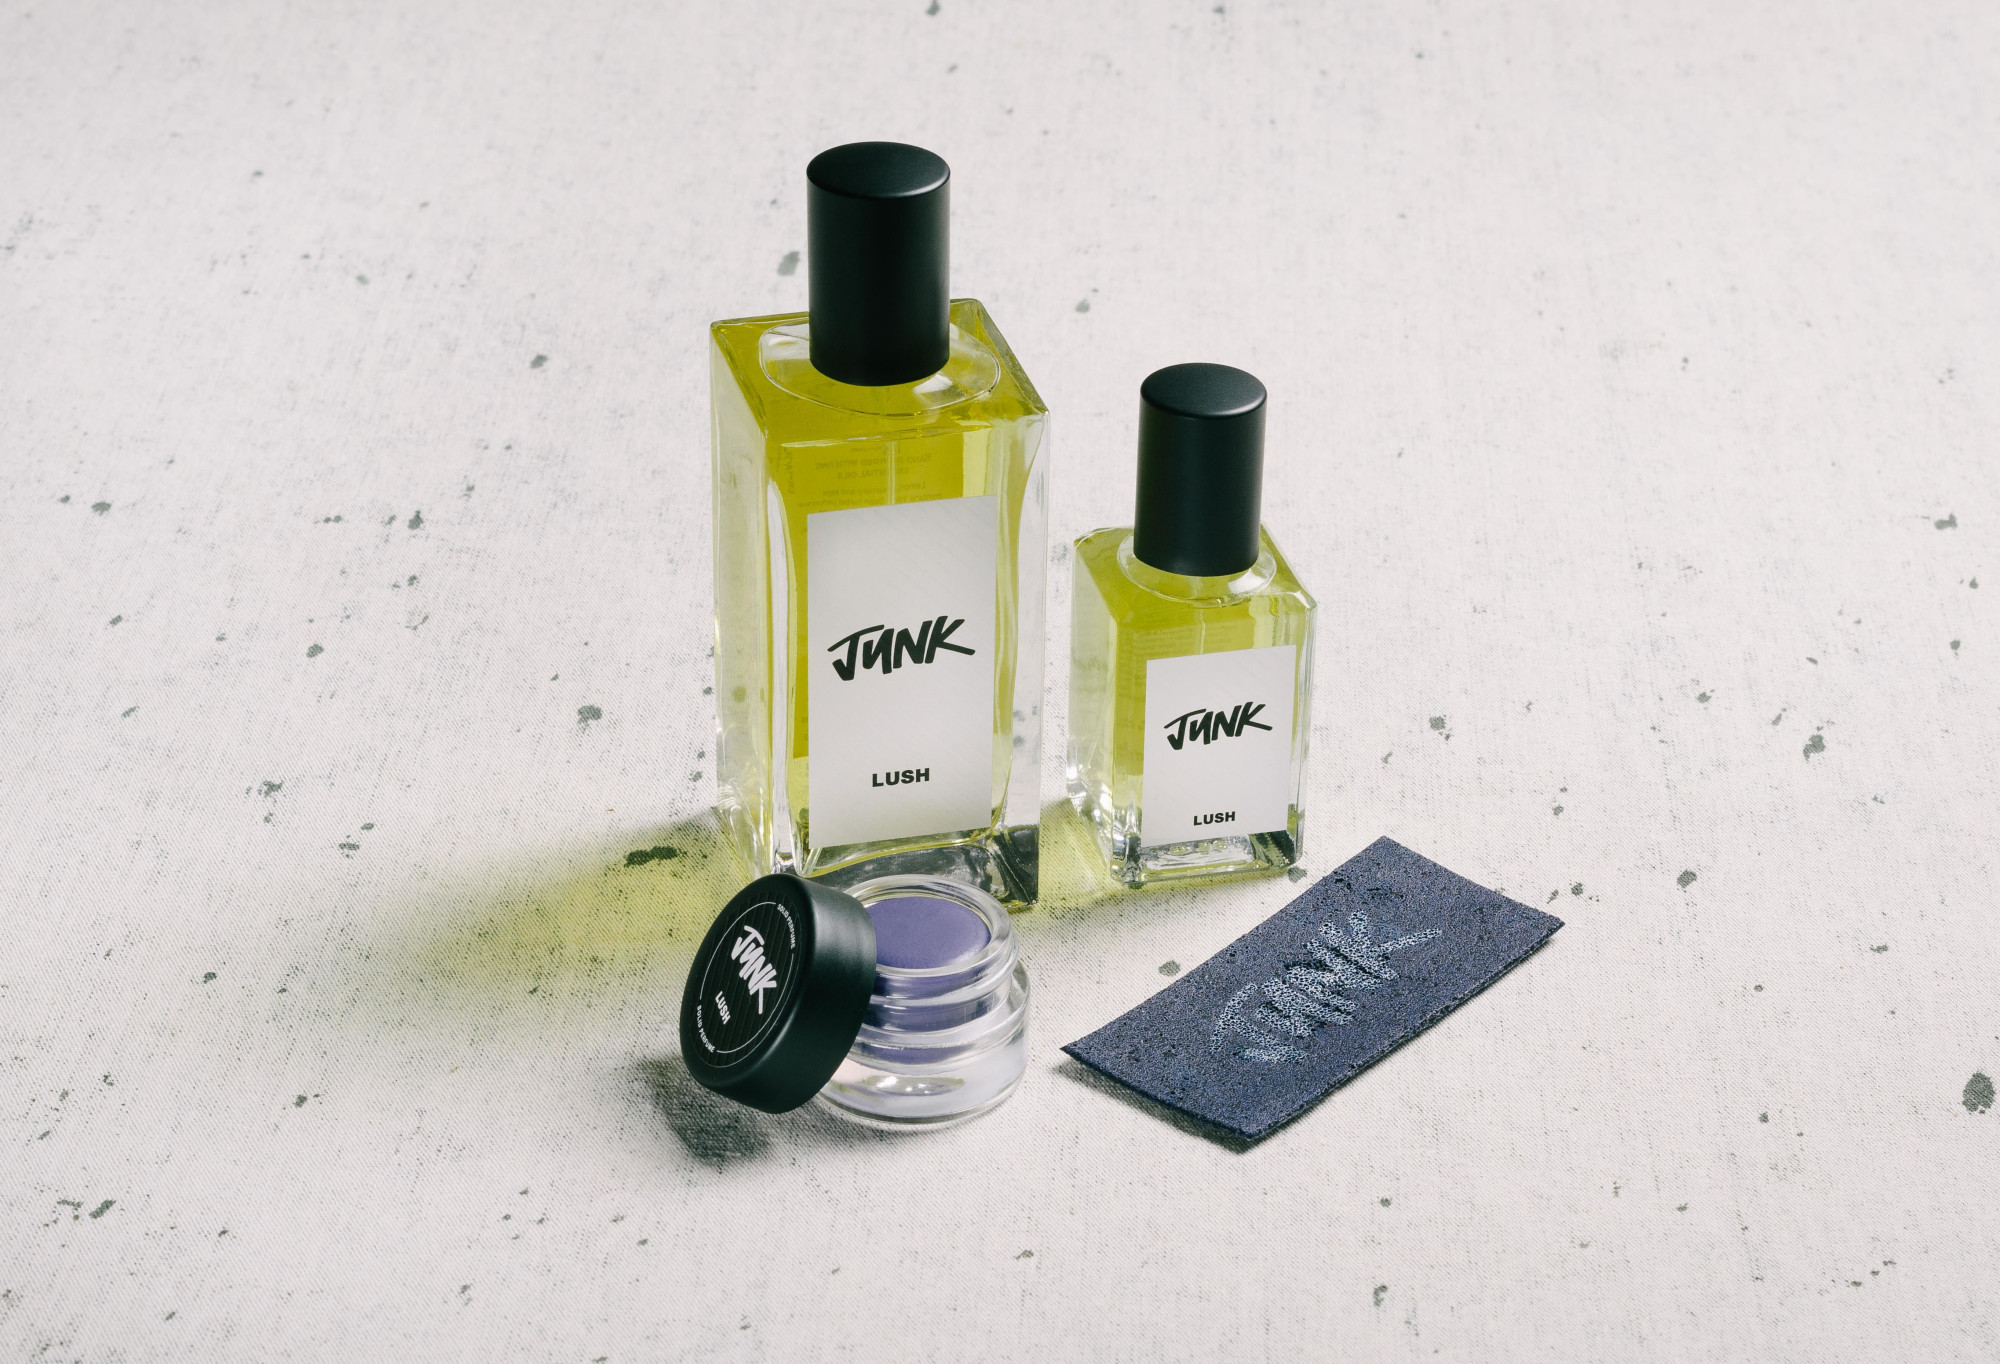 The whole Junk fragrance collection is displayed on a white surface, flecked with grey.